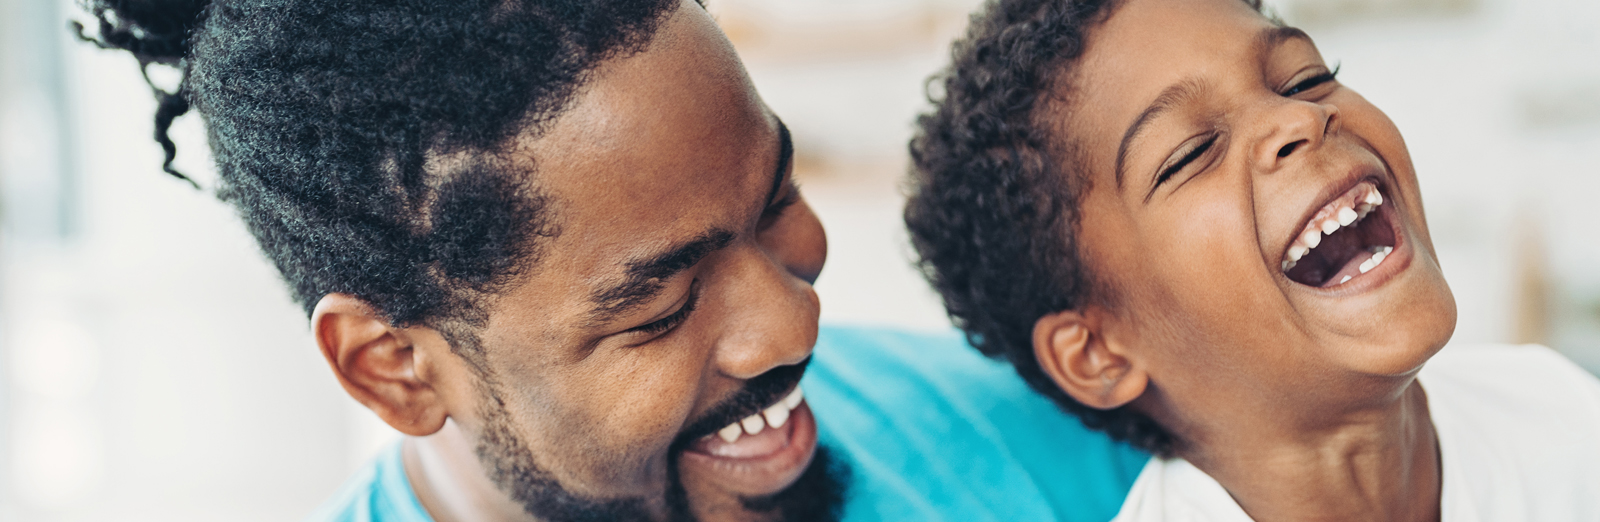 father-and-son-laughing-1600x522.jpg